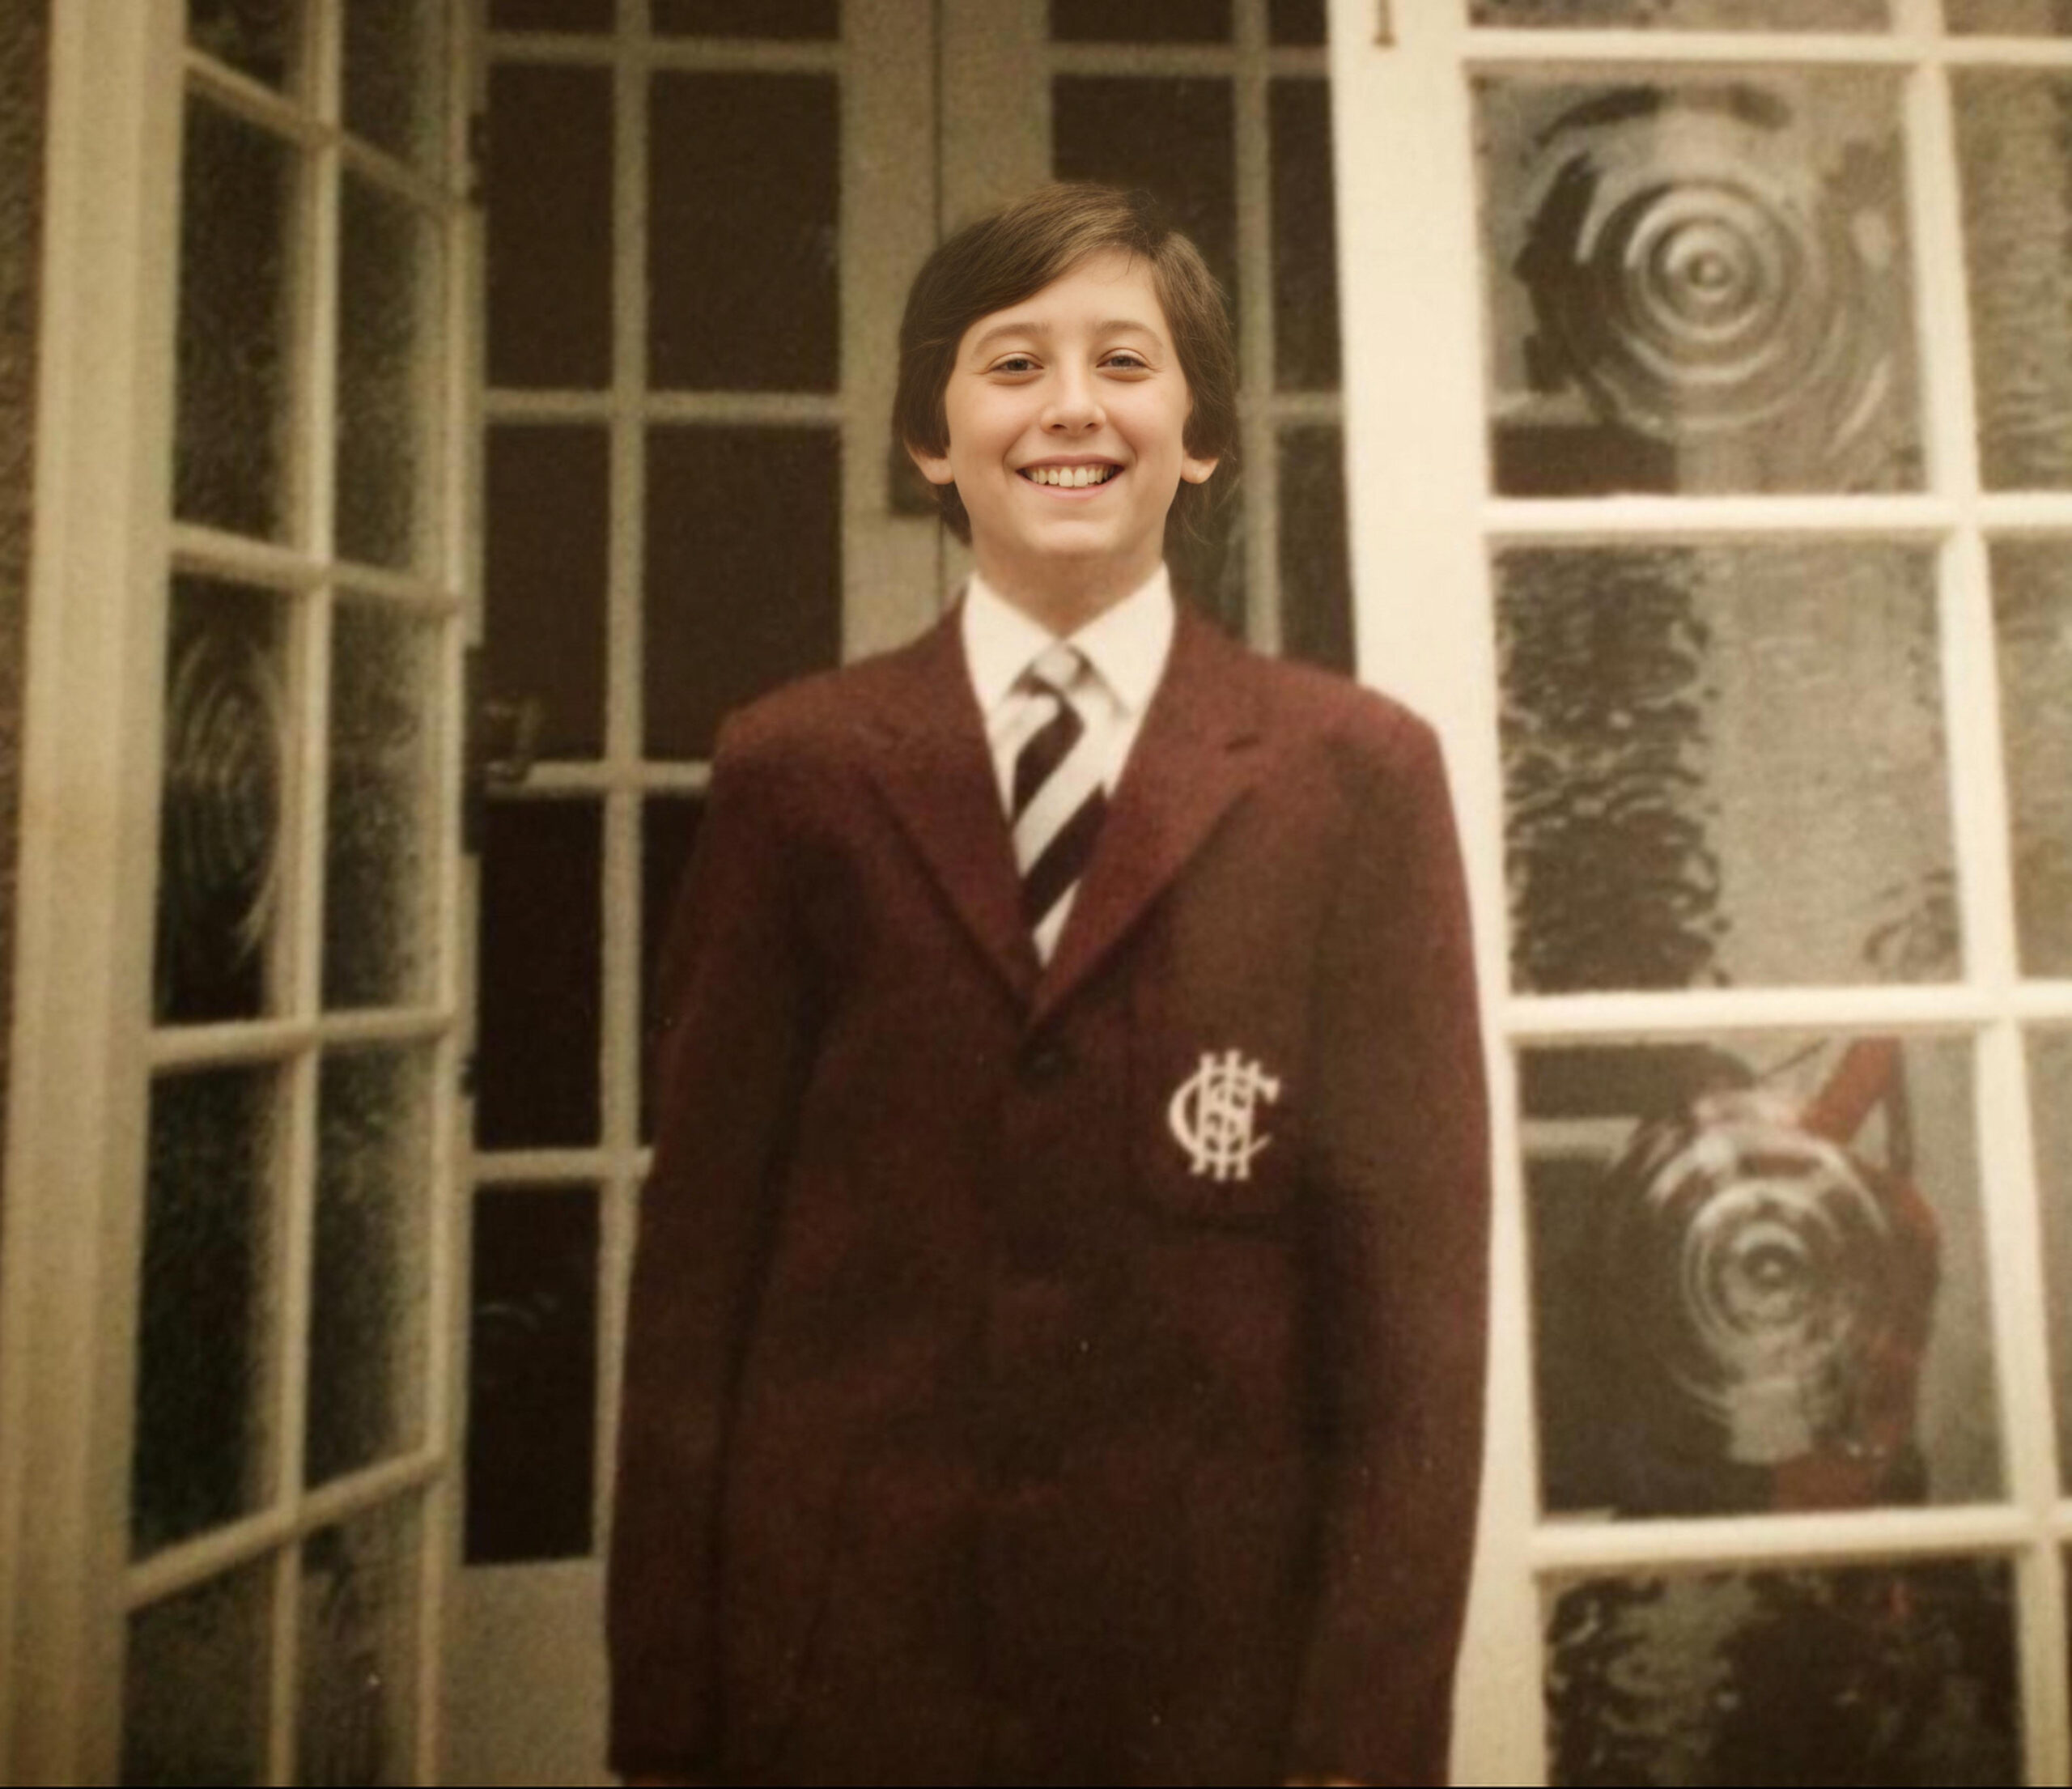 Paul is proudly smiling for the camera wearing a smart burgundy coloured school uniform.